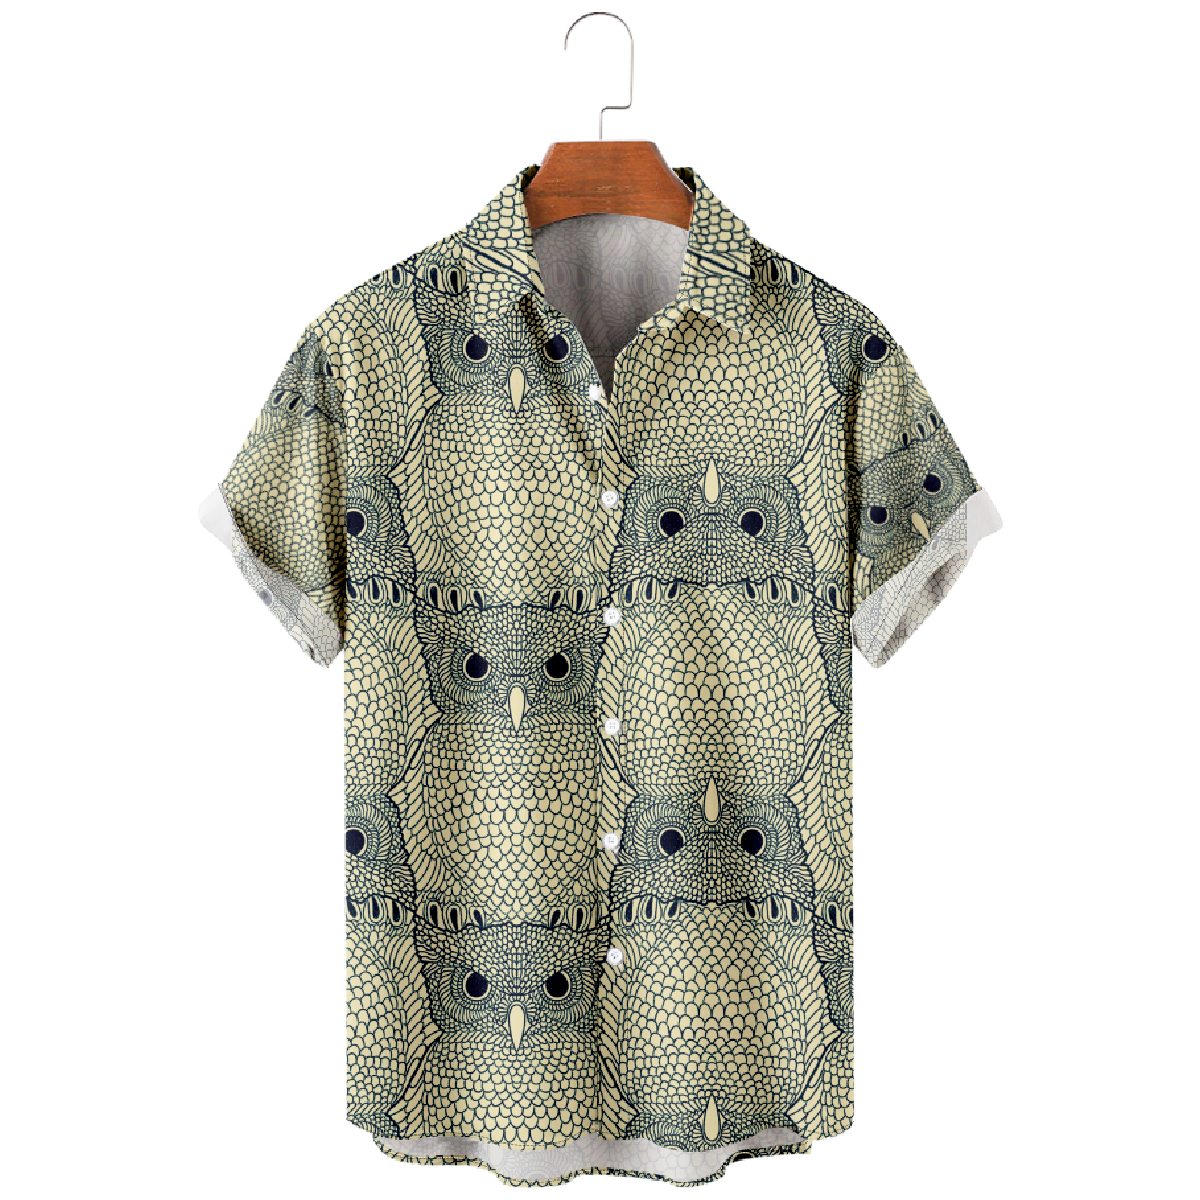 Men's Owl Graphic Print Button Up Shirt Short Sleeve Regular Fit Breathable Tops